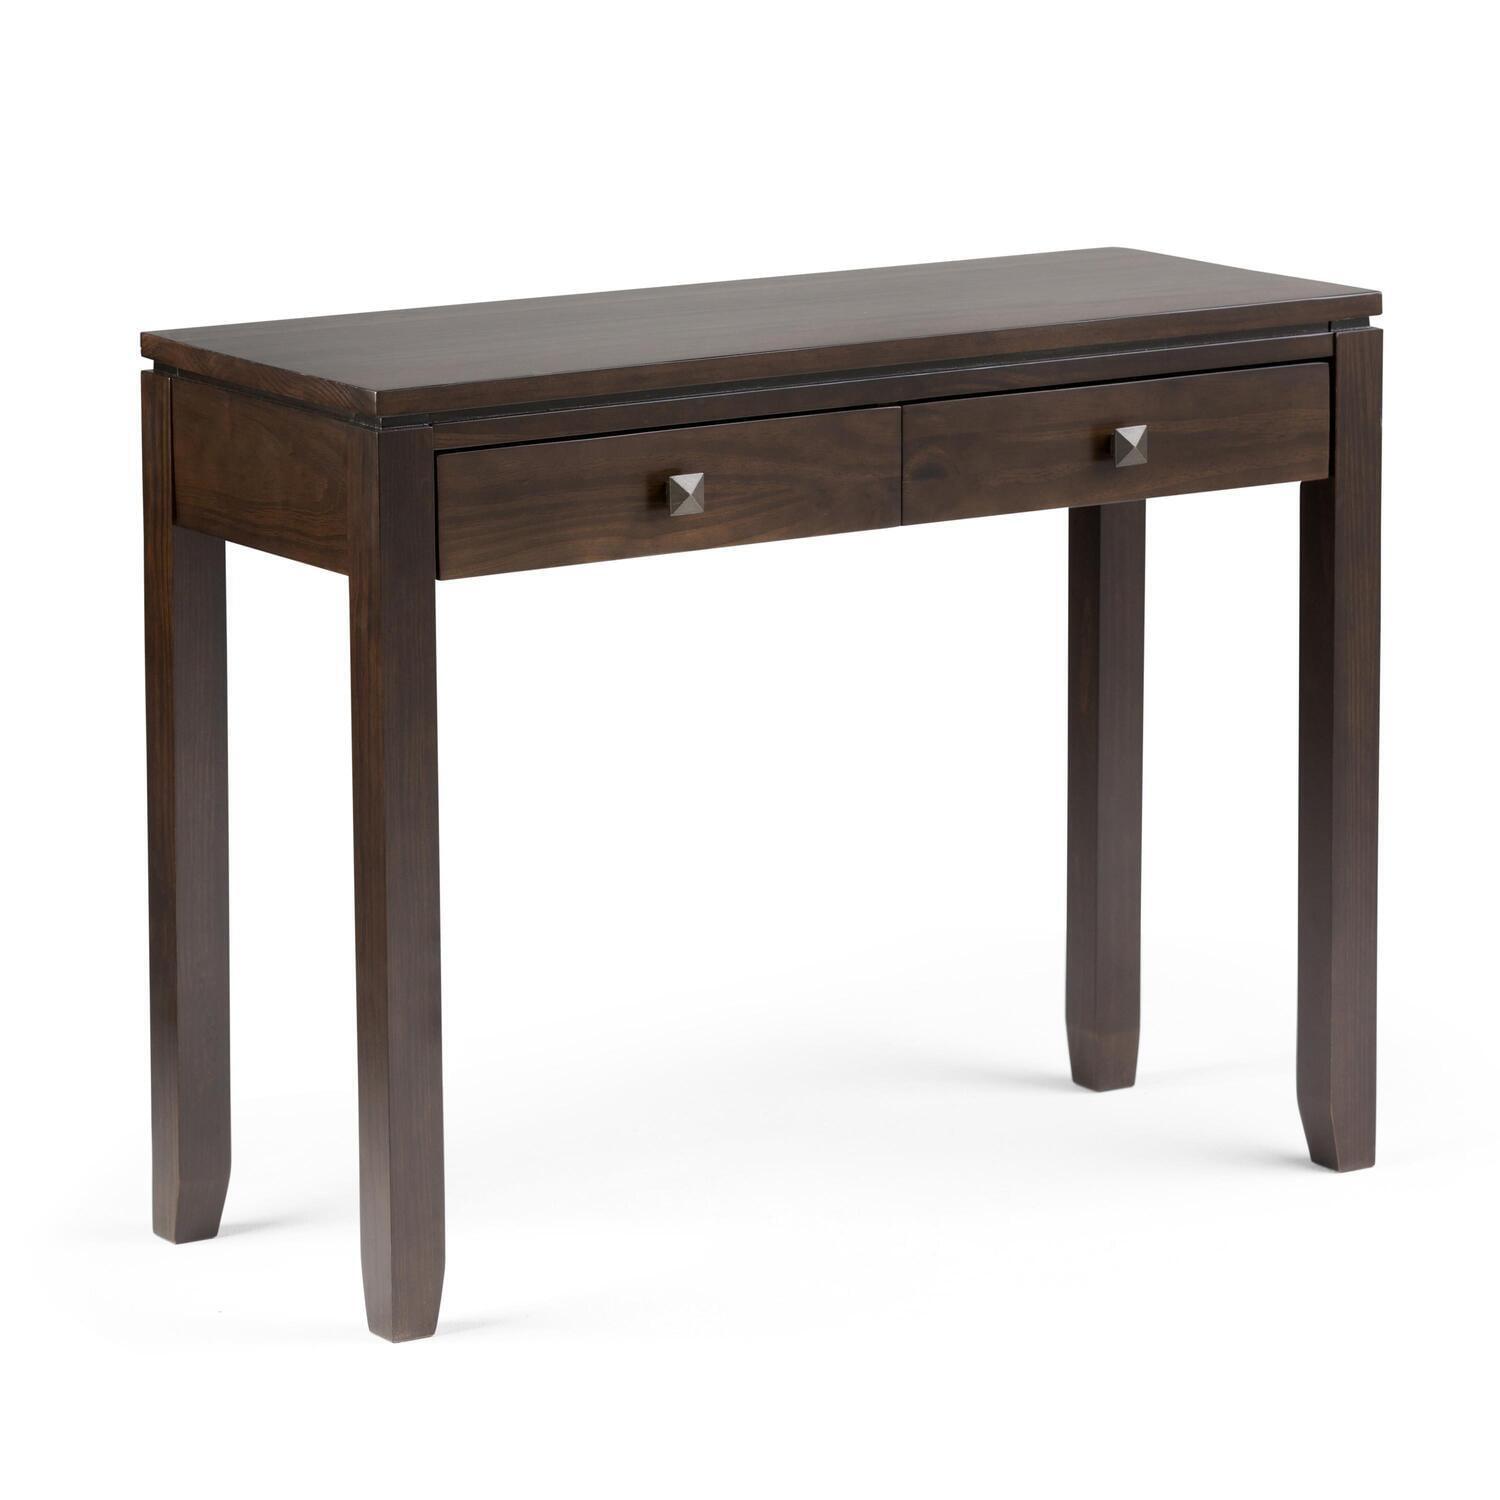 Cosmopolitan Mahogany Brown Console Table with Storage Drawers